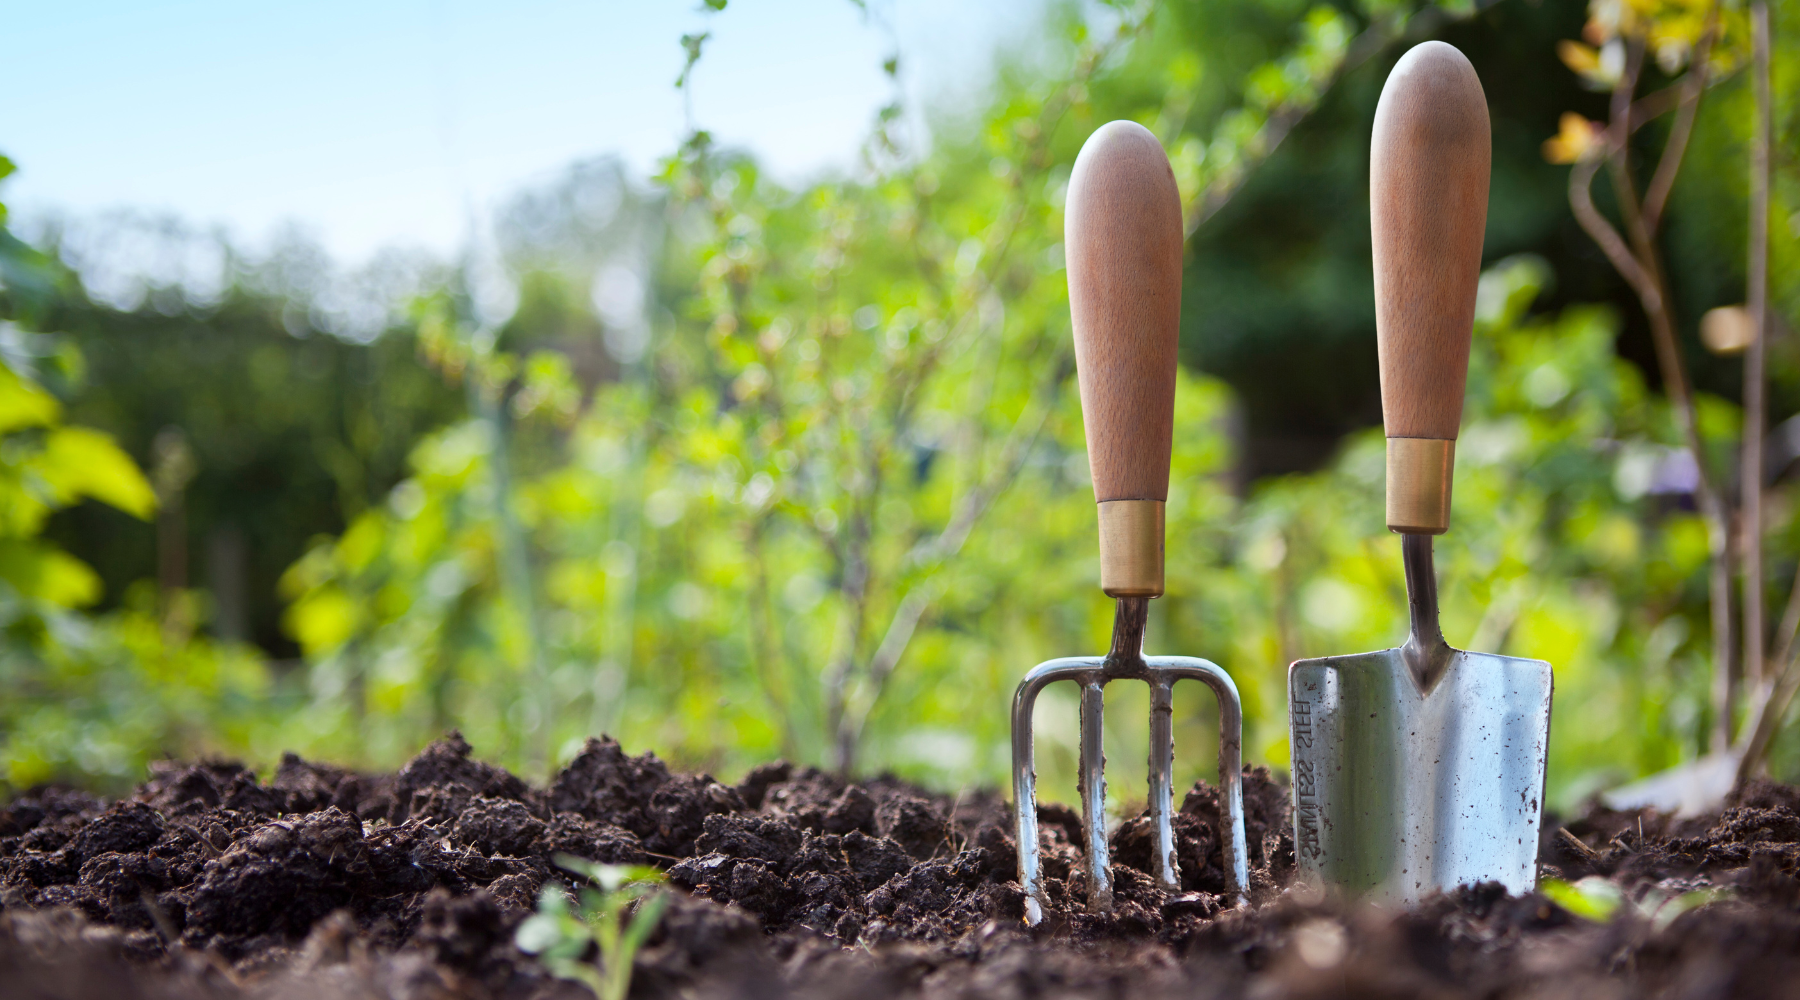 7 REASONS TO TRY YOUR HAND AT GARDENING